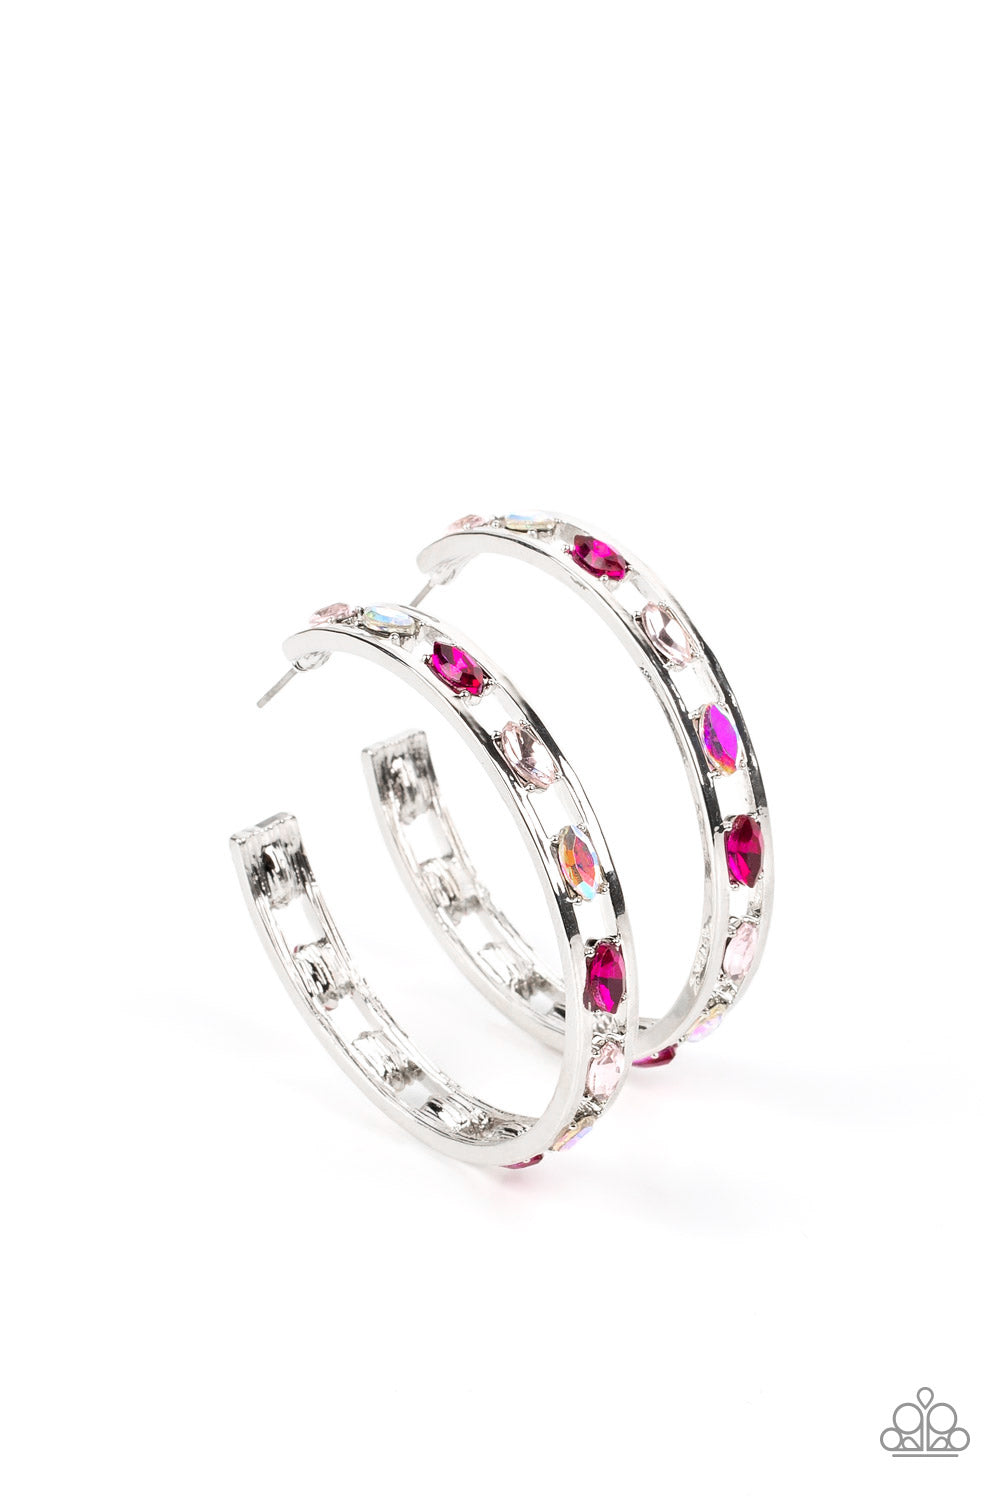 Paparazzi The Gem Fairy Pink Post Hoop Earrings - Life of the Party Exclusive February 2023 - P5HO-PKXX-047XX